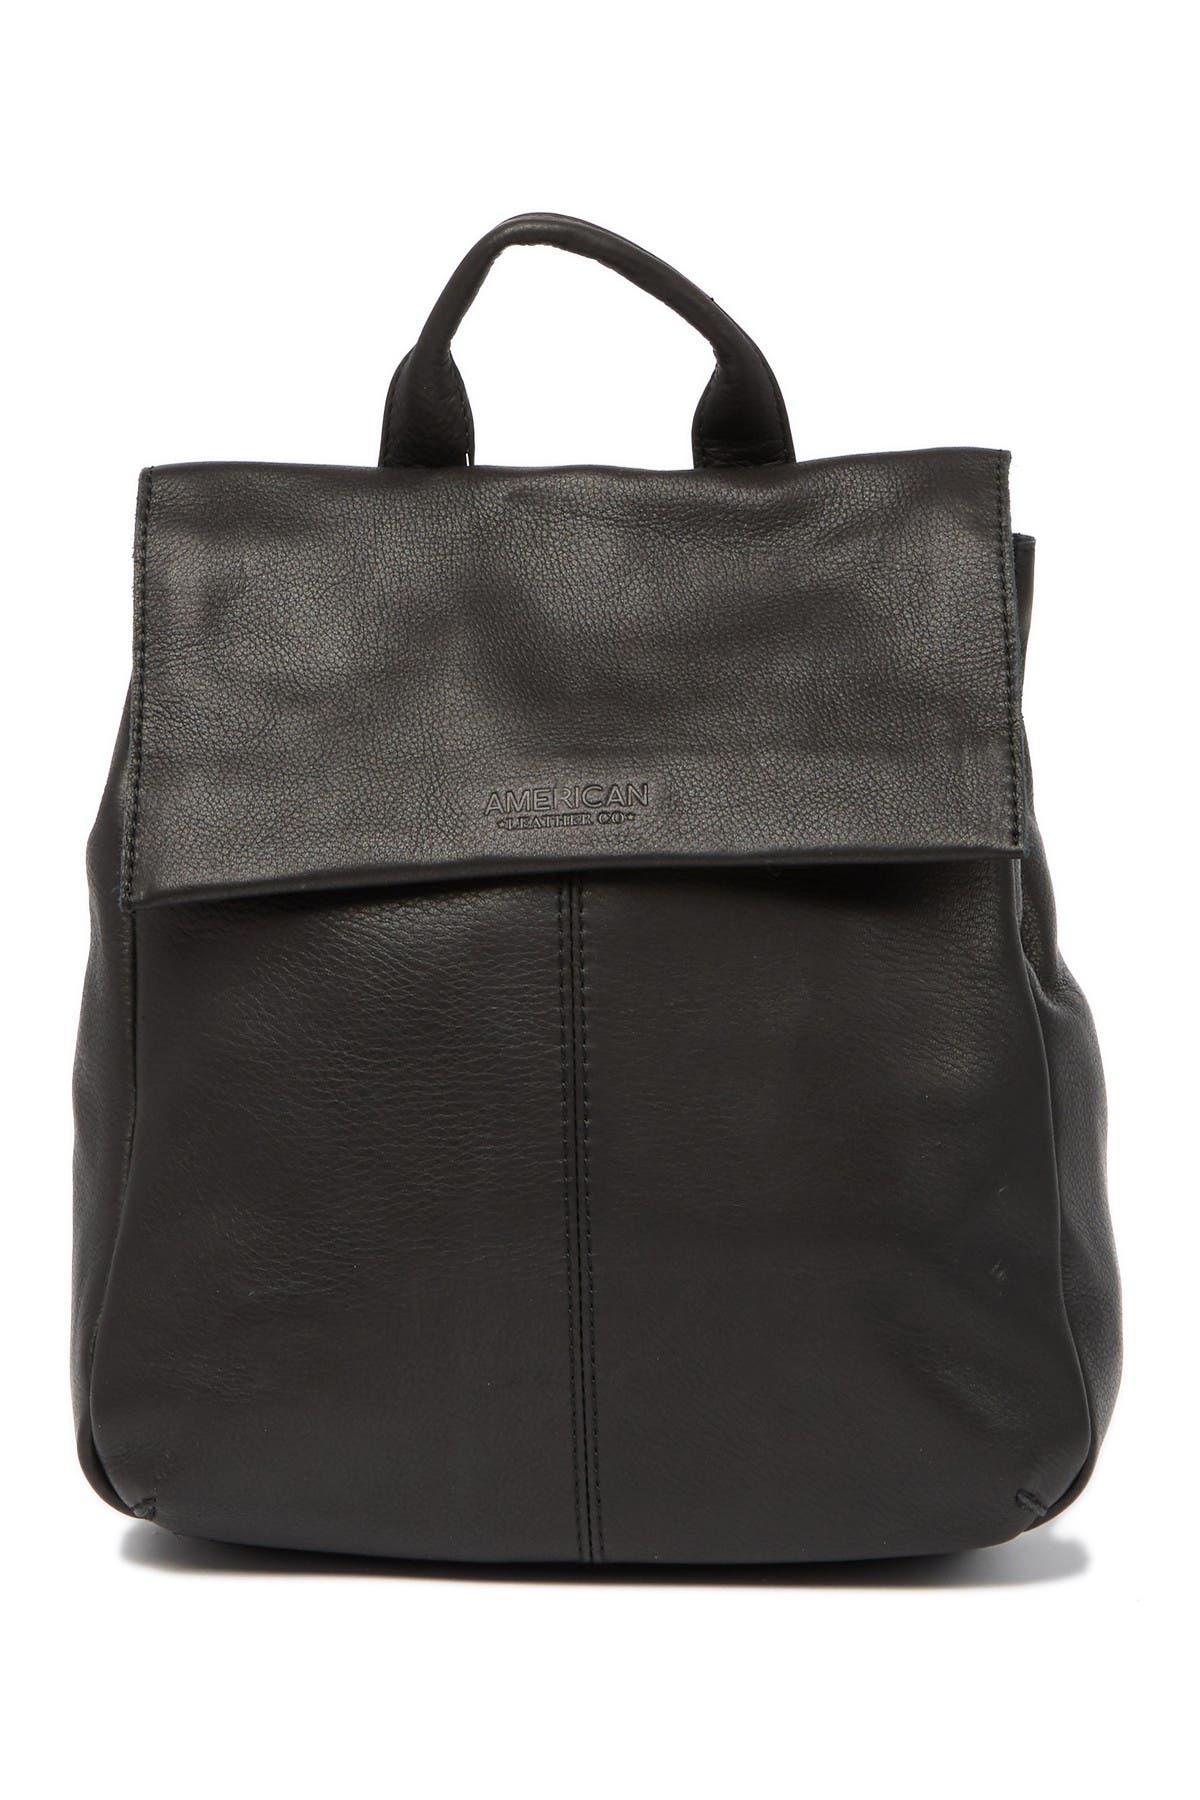 AMERICAN LEATHER CO. | Liberty Leather Flap Backpack | Nordstrom Rack